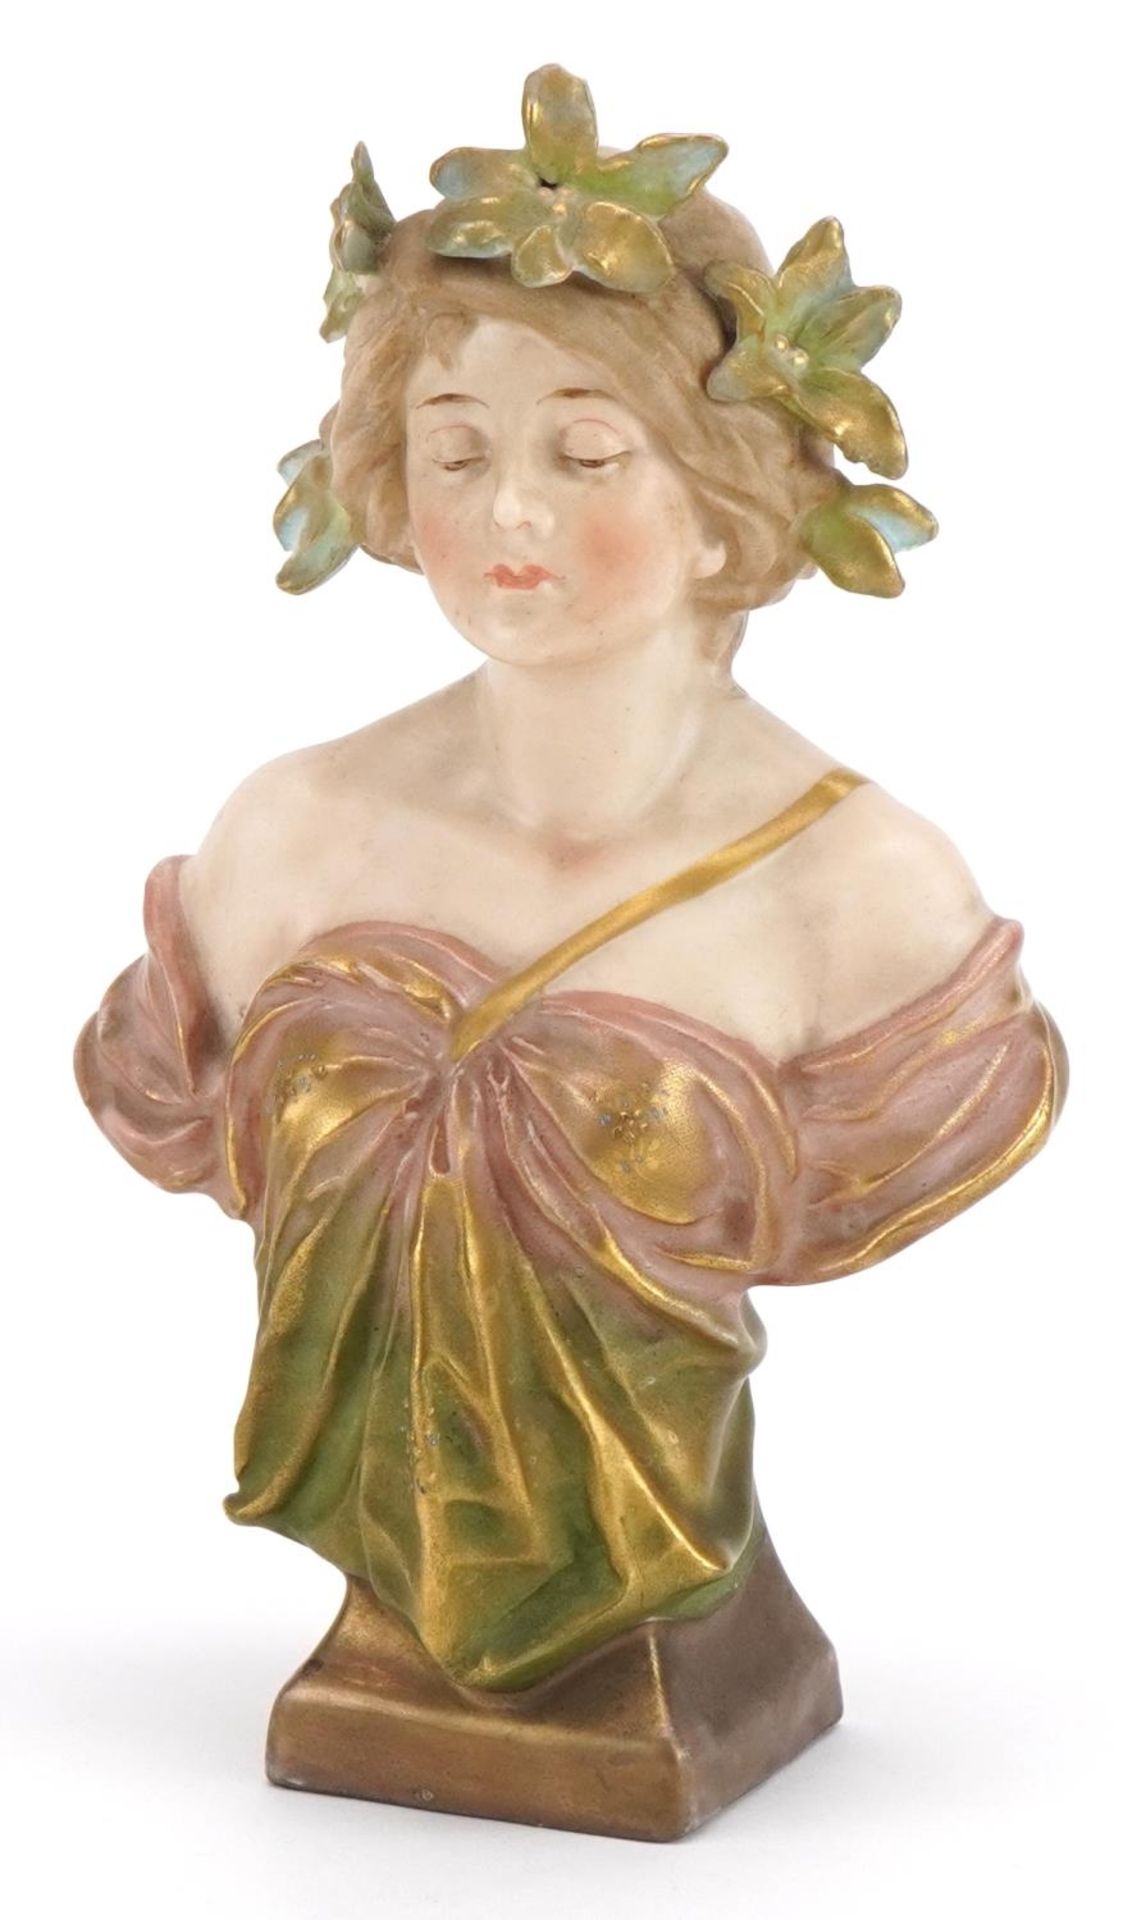 Royal Vienna, Austrian Art Nouveau porcelain bust of a maiden with floral garland, numbered 4592 - Image 2 of 6